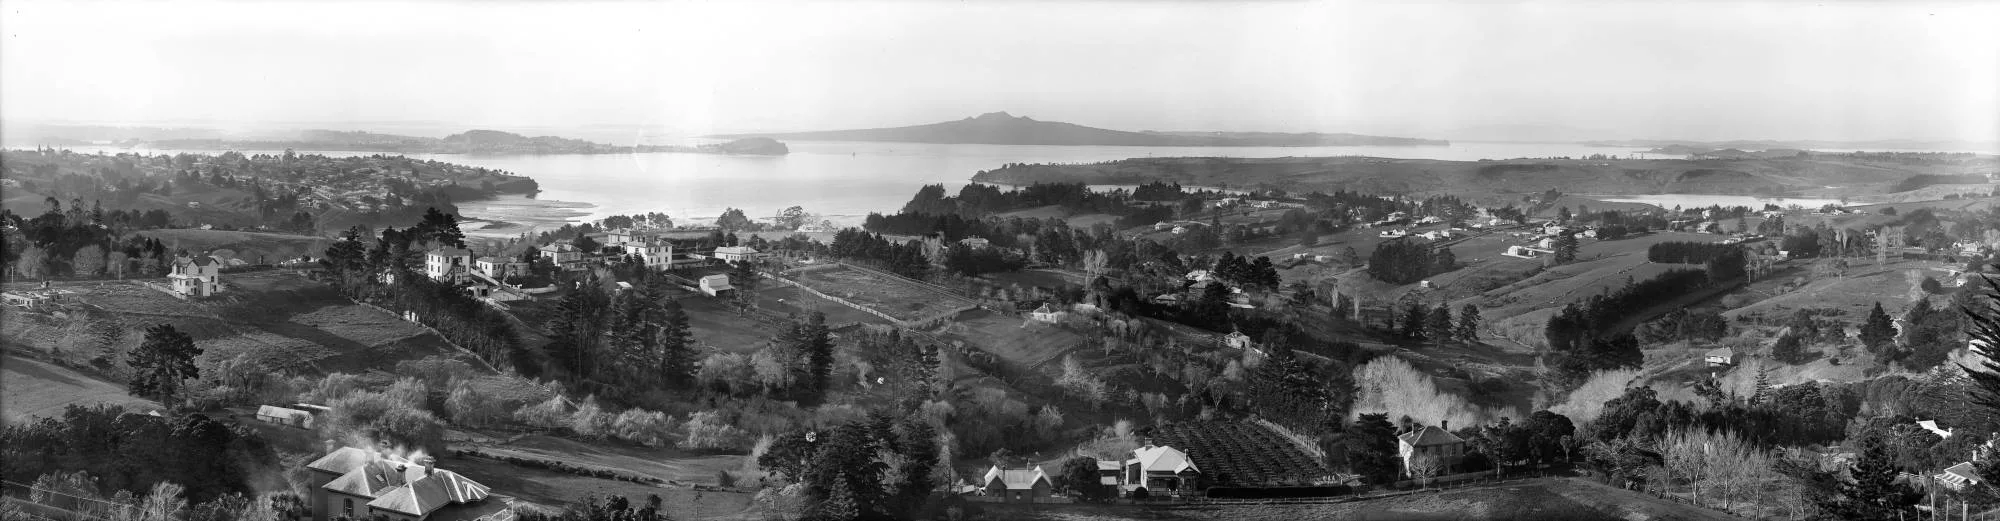 Parnell, Remuera and Hobson Bay from Mount Hobson, 1904. Auckland Libraries Heritage Collections.